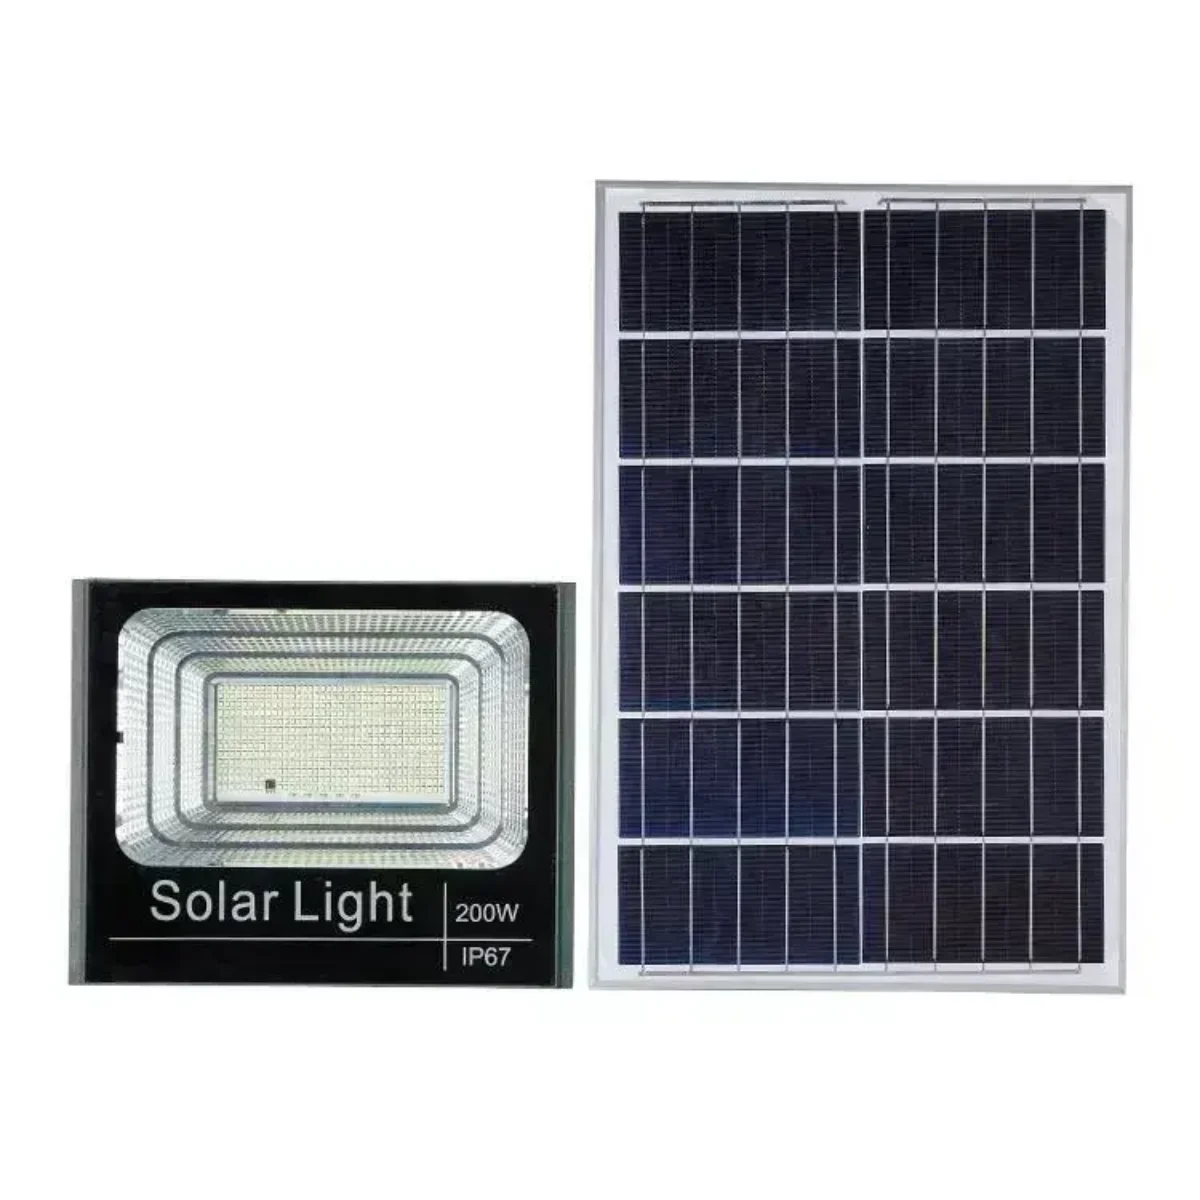 Solar flood lights outdoor for home security online at best price